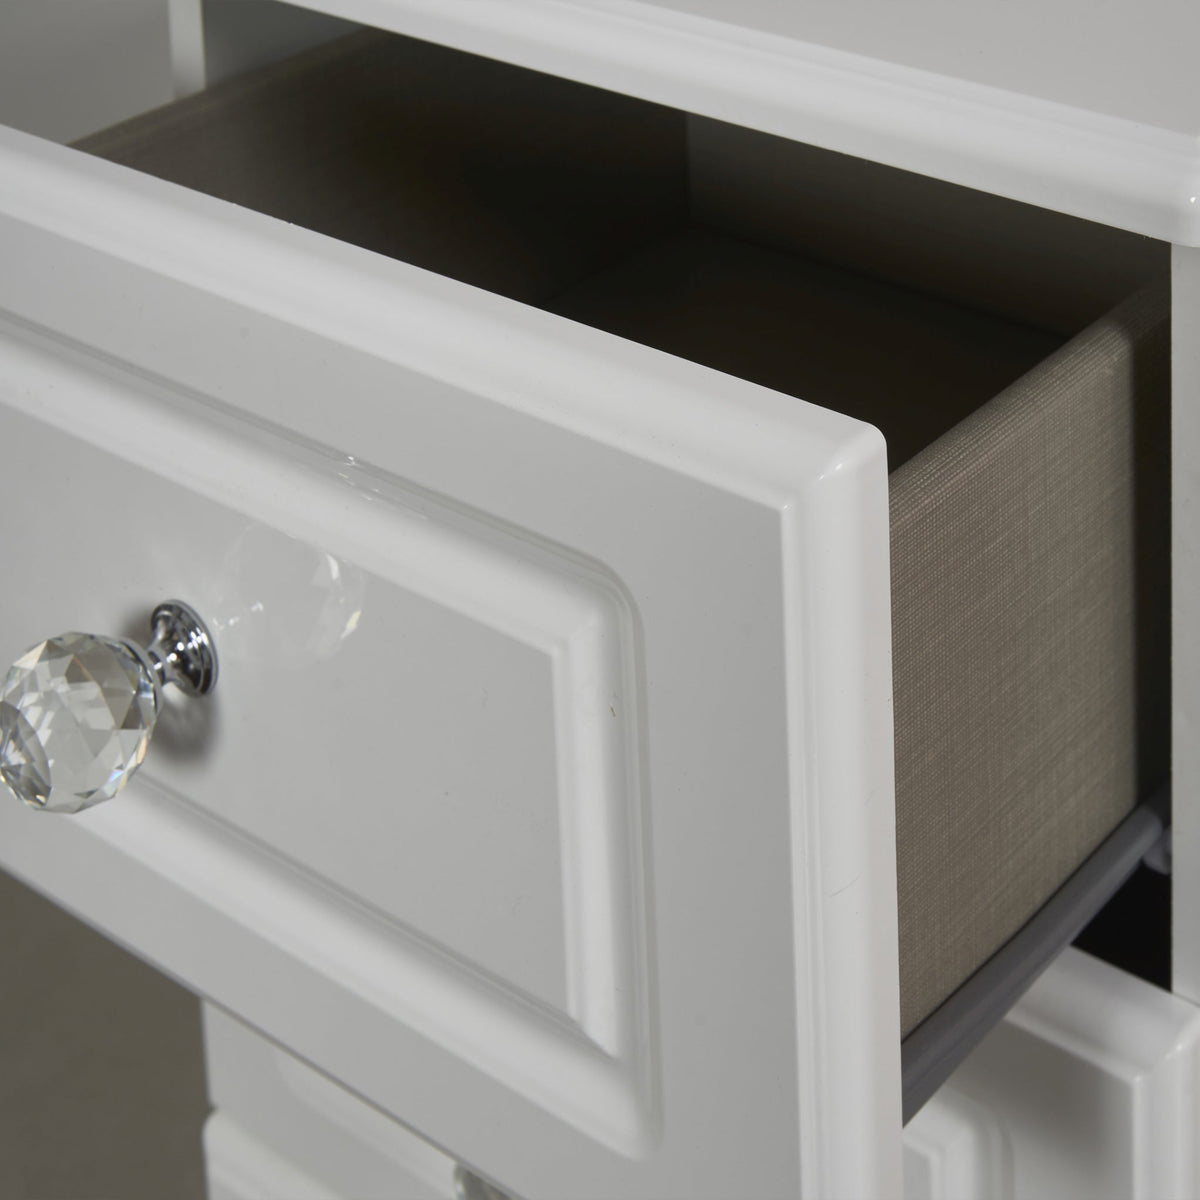 Kinsley White Gloss 3 Drawer Bedside Cabinet from Roseland open closeup